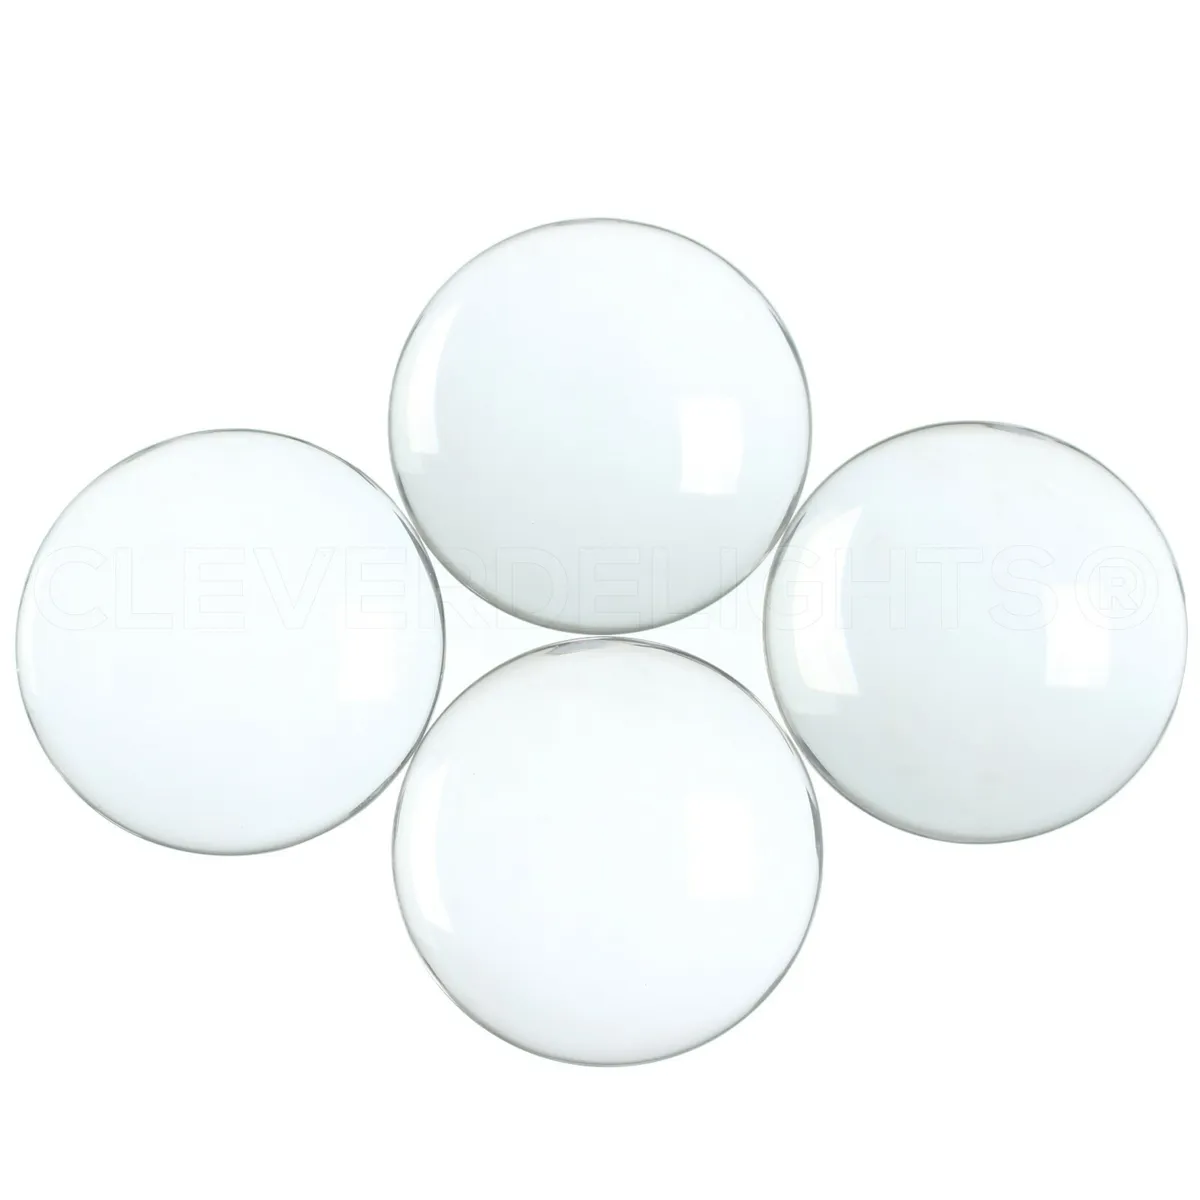 30mm (1 3/16) Round Glass Cabochons - Clear Magnifying Dome Cabs - 1 3/16  inch